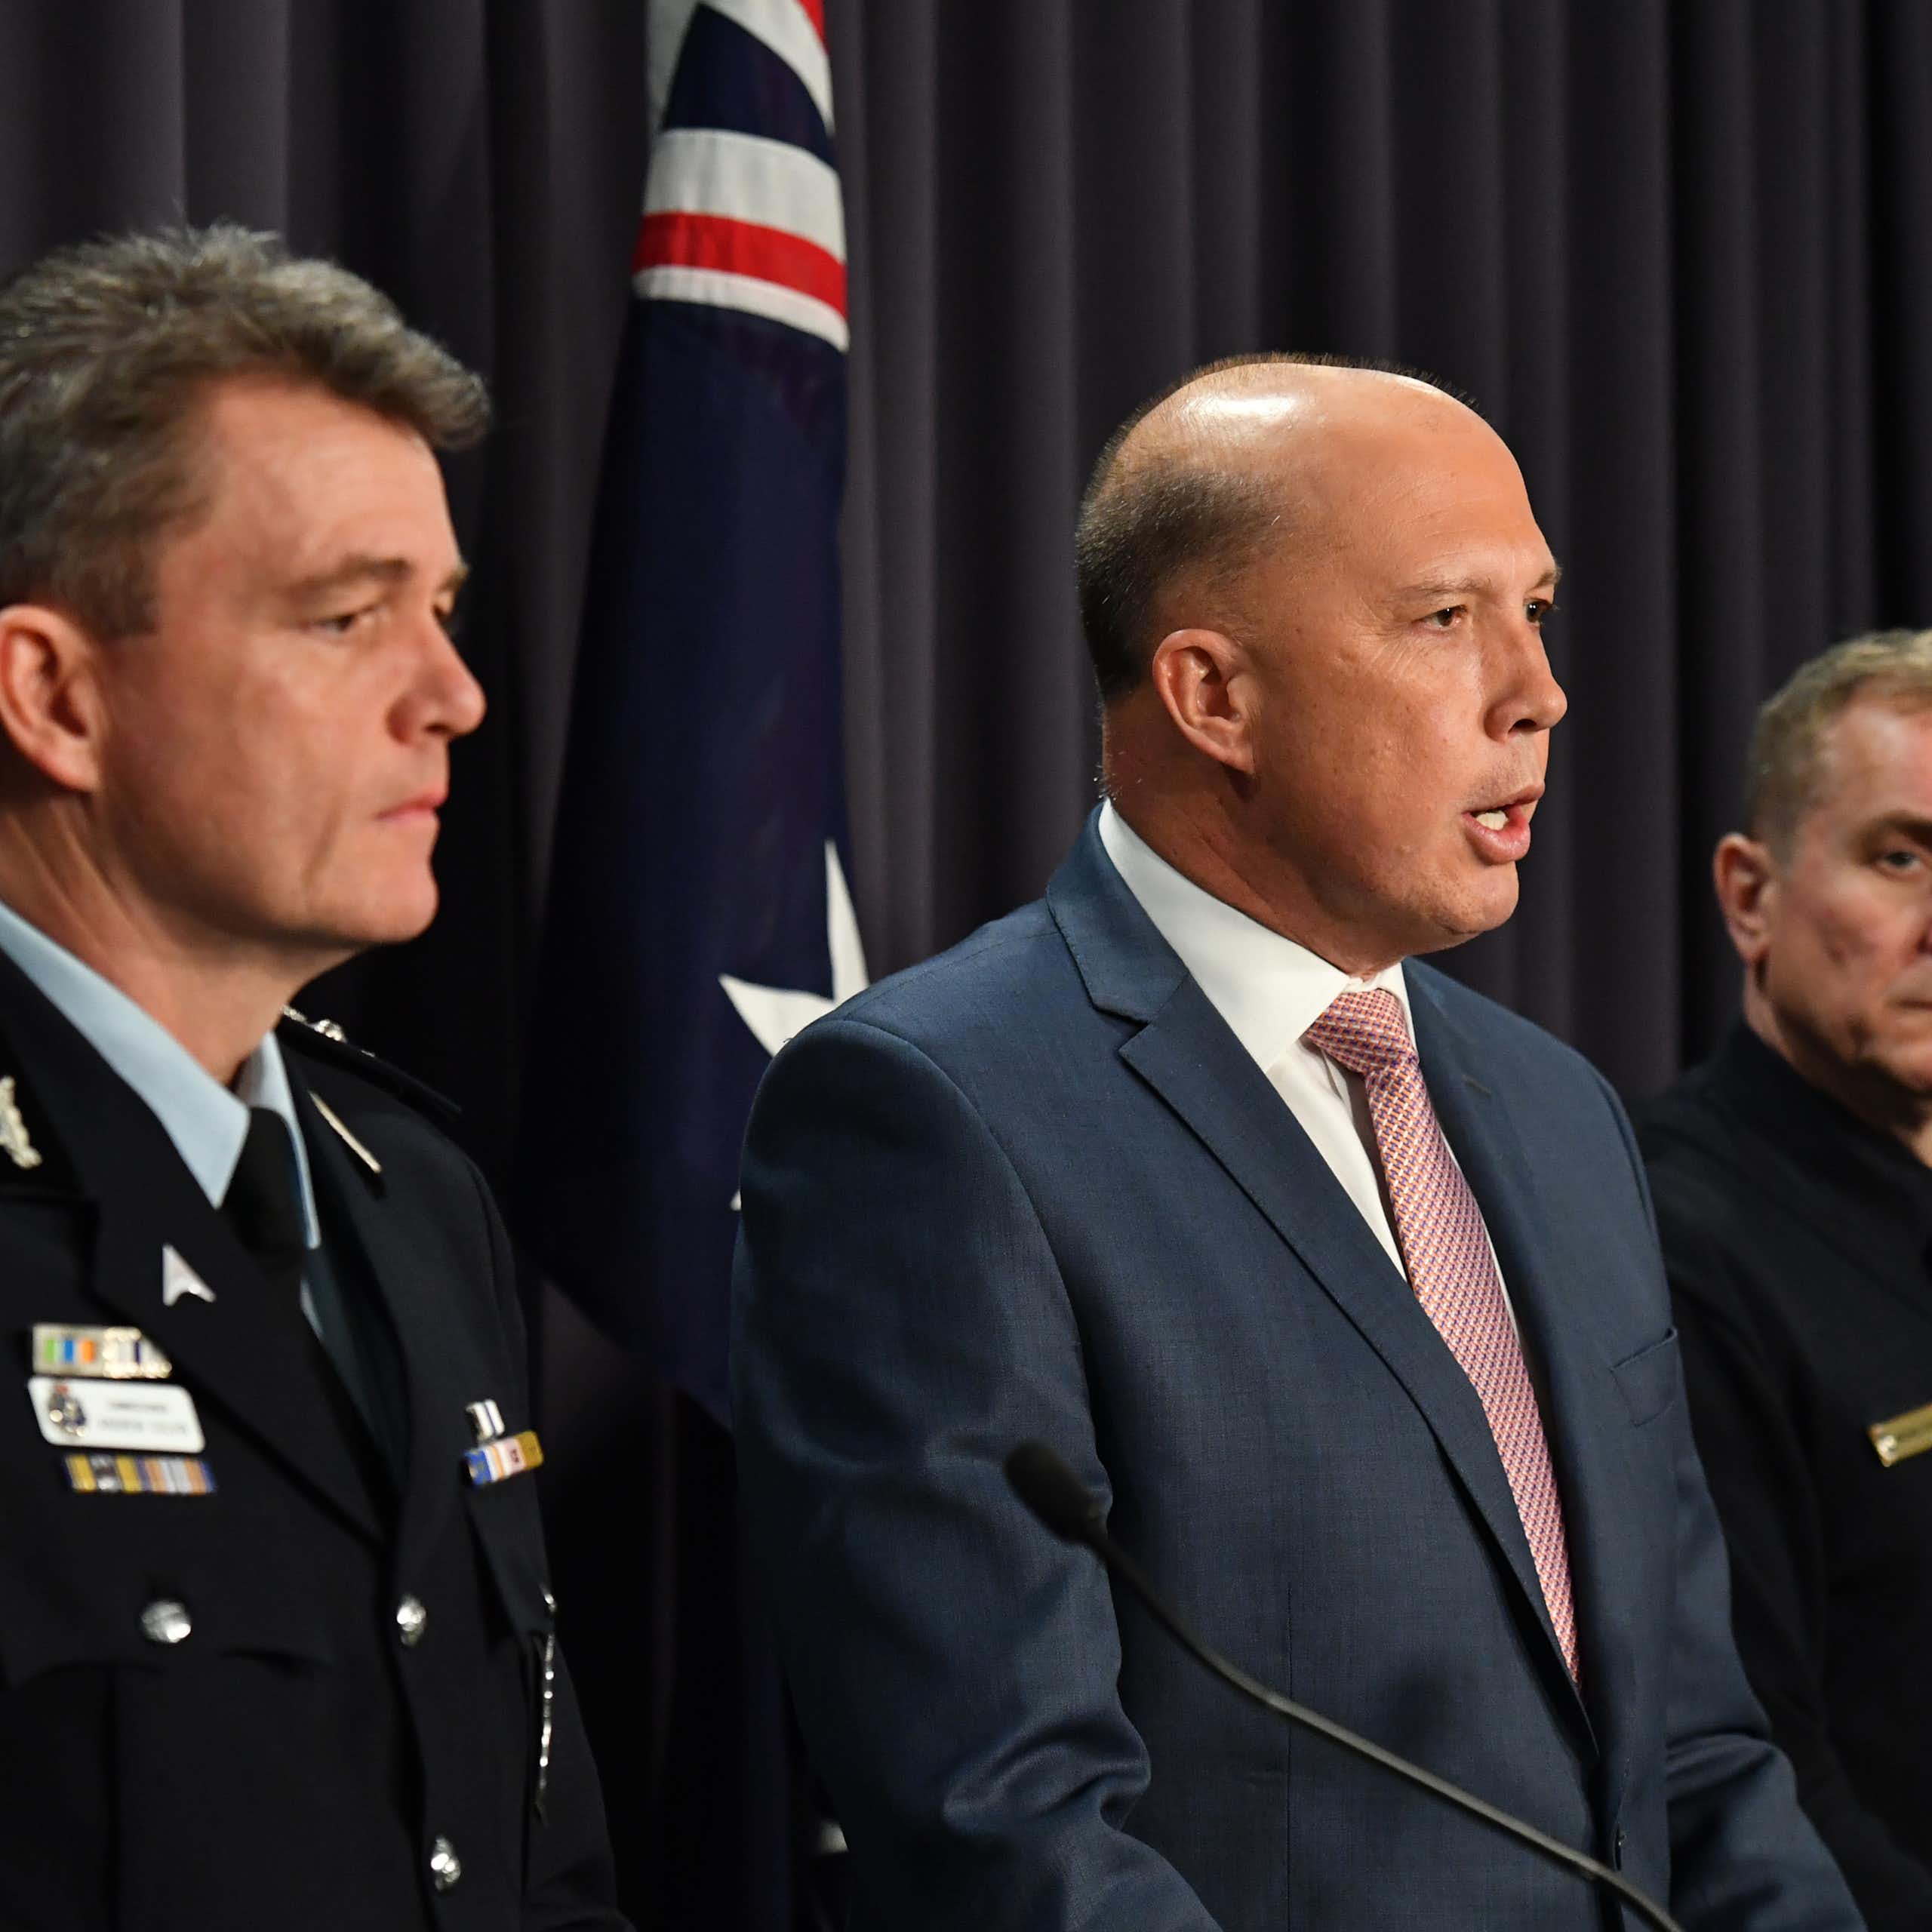 Outrage is a key performance indicator for Peter Dutton, the ‘bad cop’ of politics. But what does he value?